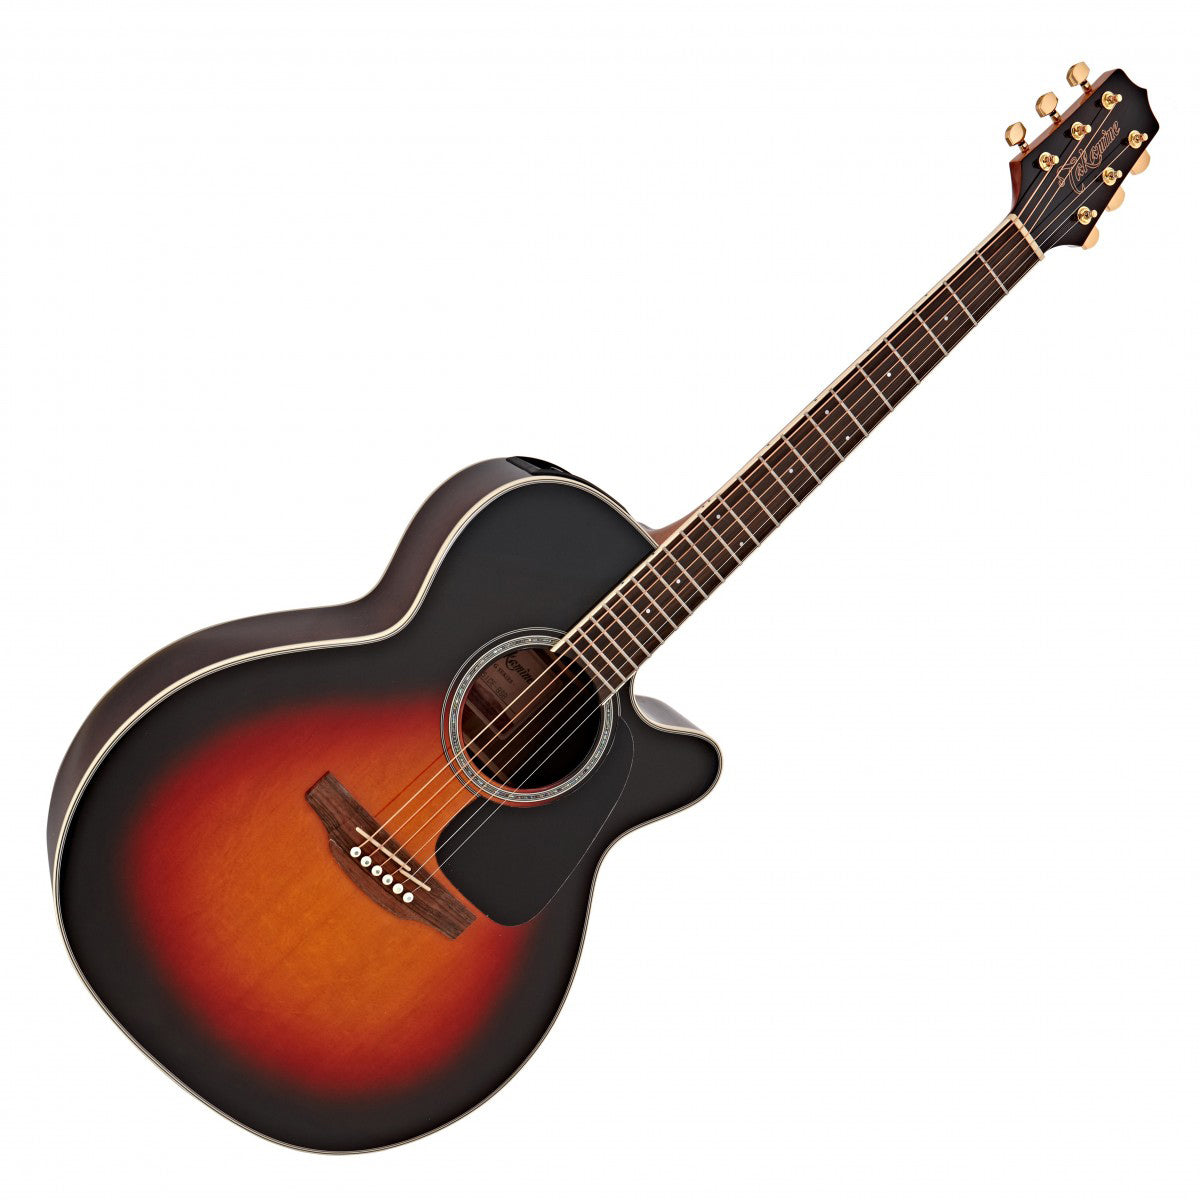 Takamine GN51CE Acoustic Guitar